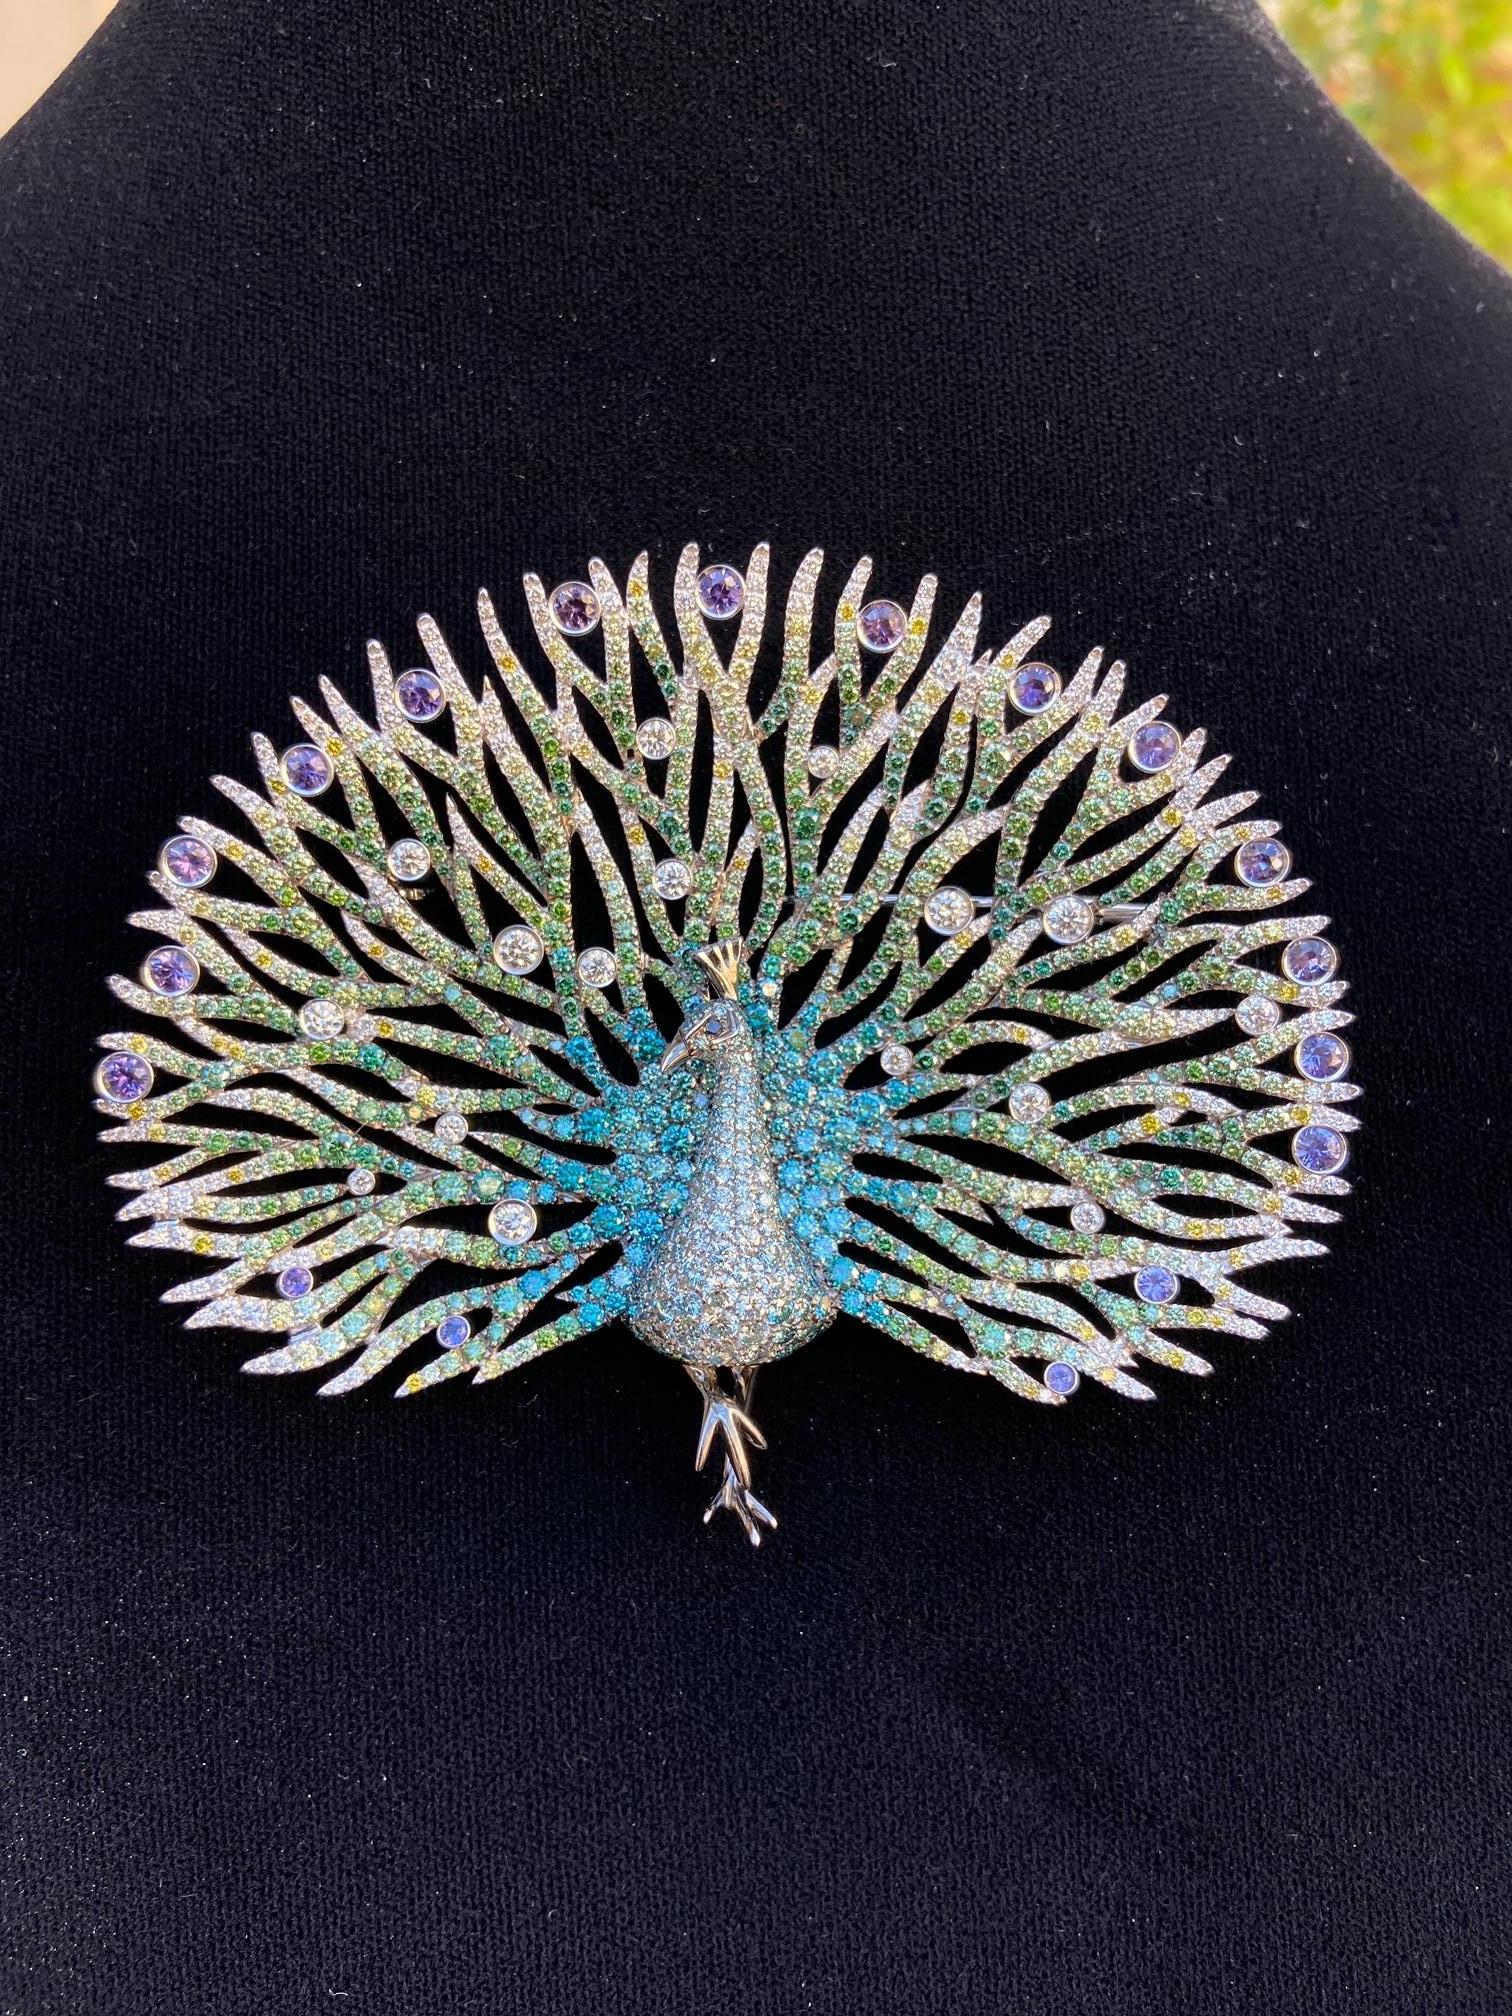 Women's 14.54 Carat Multi Colored Diamond Peacock Necklace and Brooch For Sale